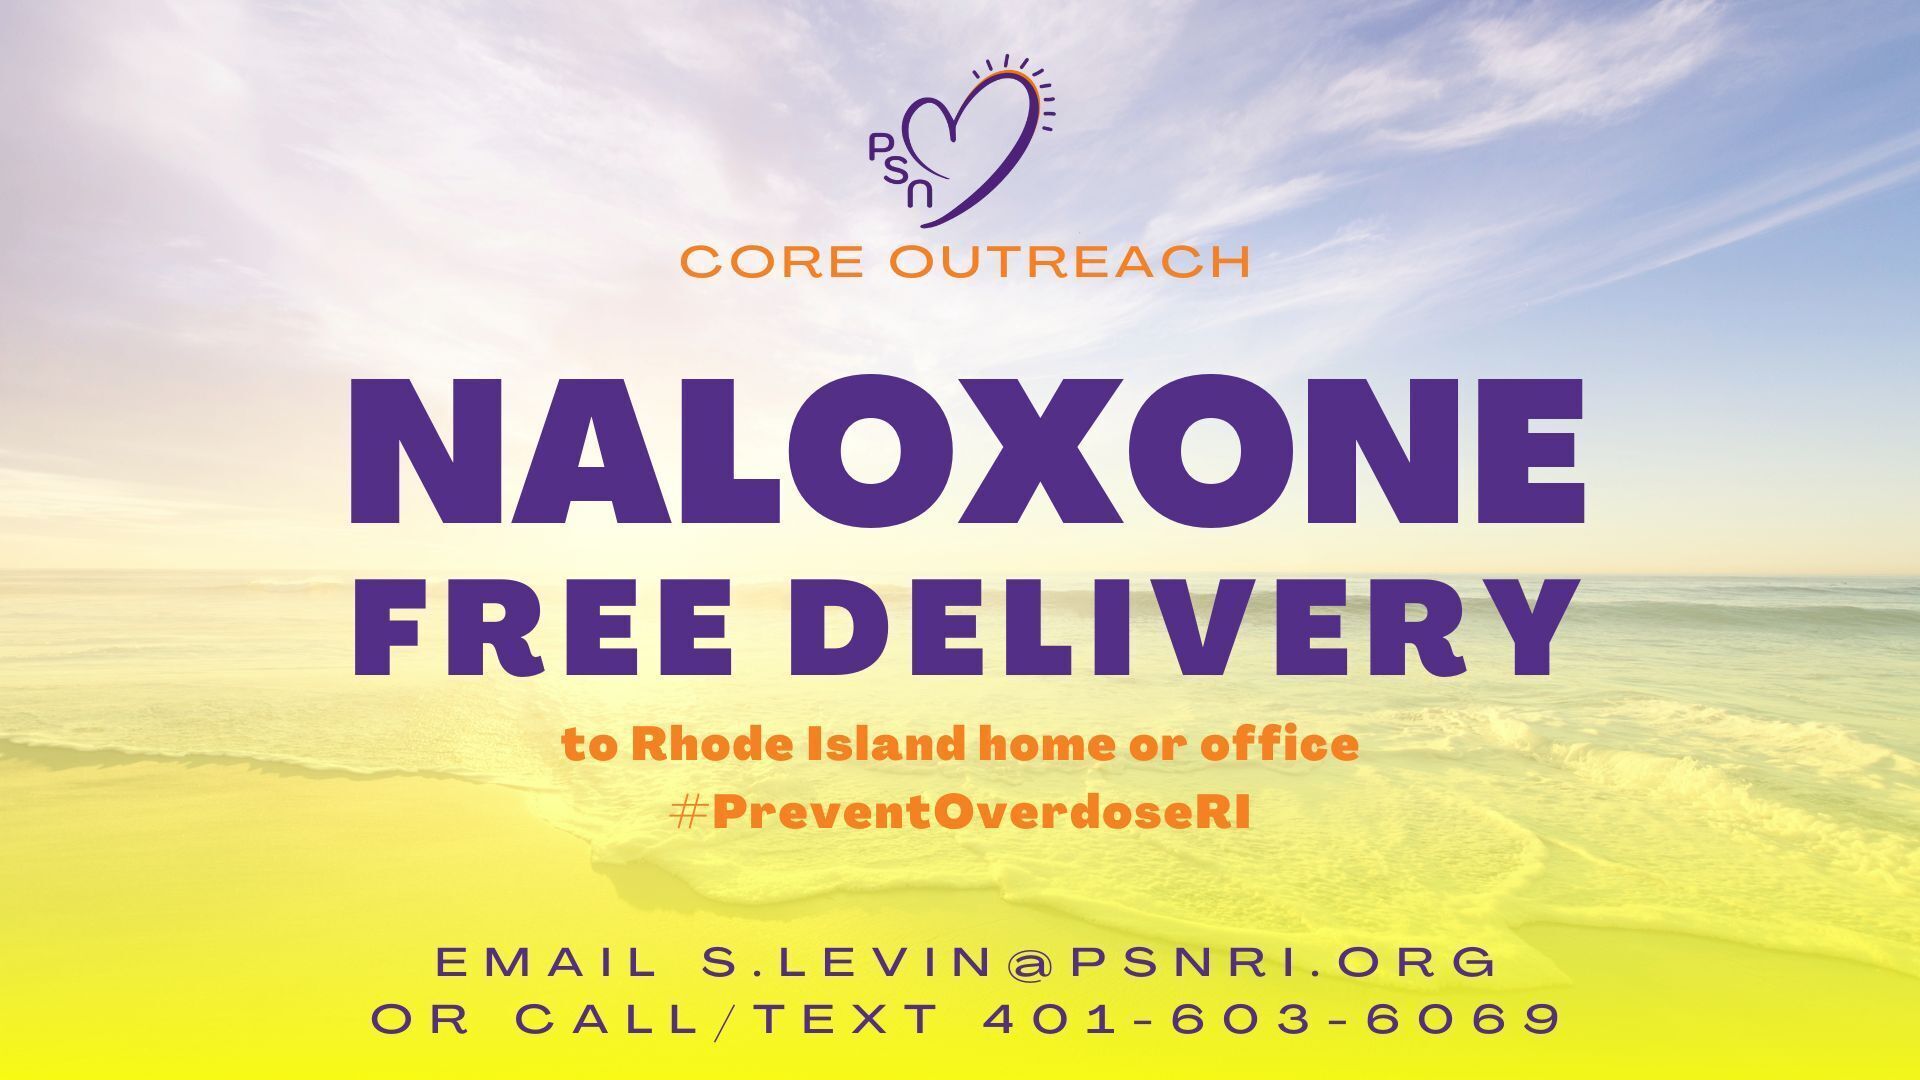 PSN Core Outreach - Naloxone Free Delivery to Rhode Island home or office #PreventOverdoseRI - email s.levin@psnri.org or call/text 401-603-6069